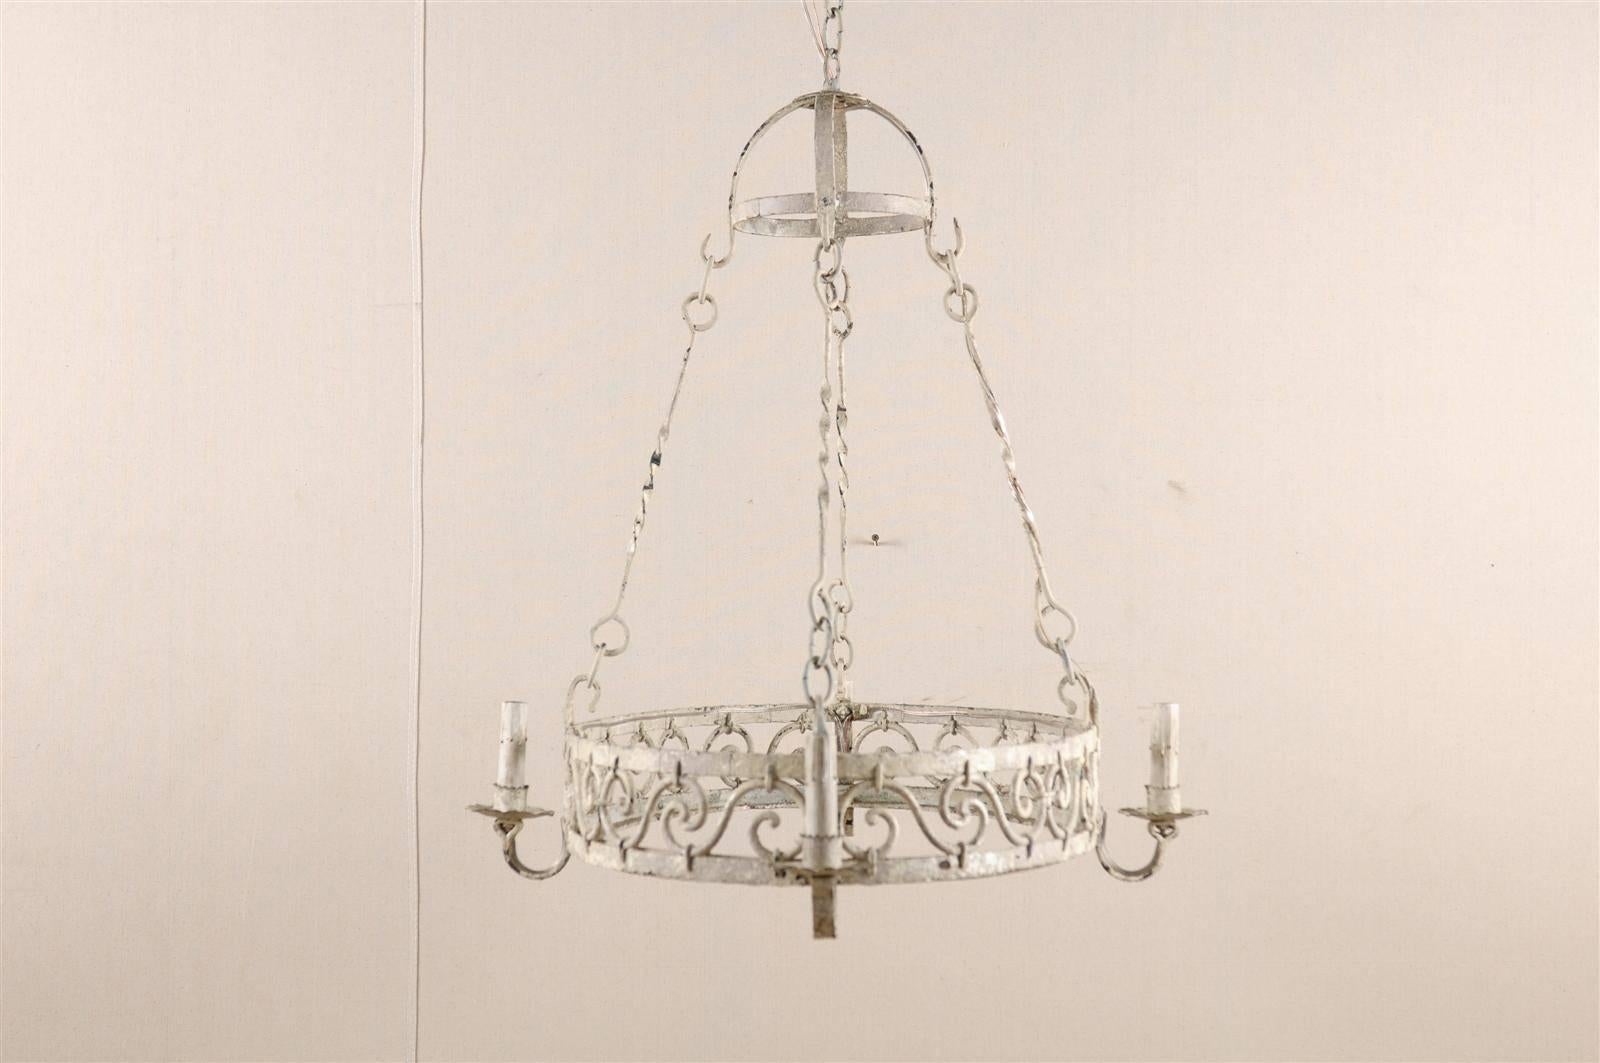 A French vintage oval chandelier. This French mid-20th century four-light chandelier features a central ring decorated with a running motif of volutes. The scrolled arms support the small bobèches and painted candle sleeves. This French chandelier